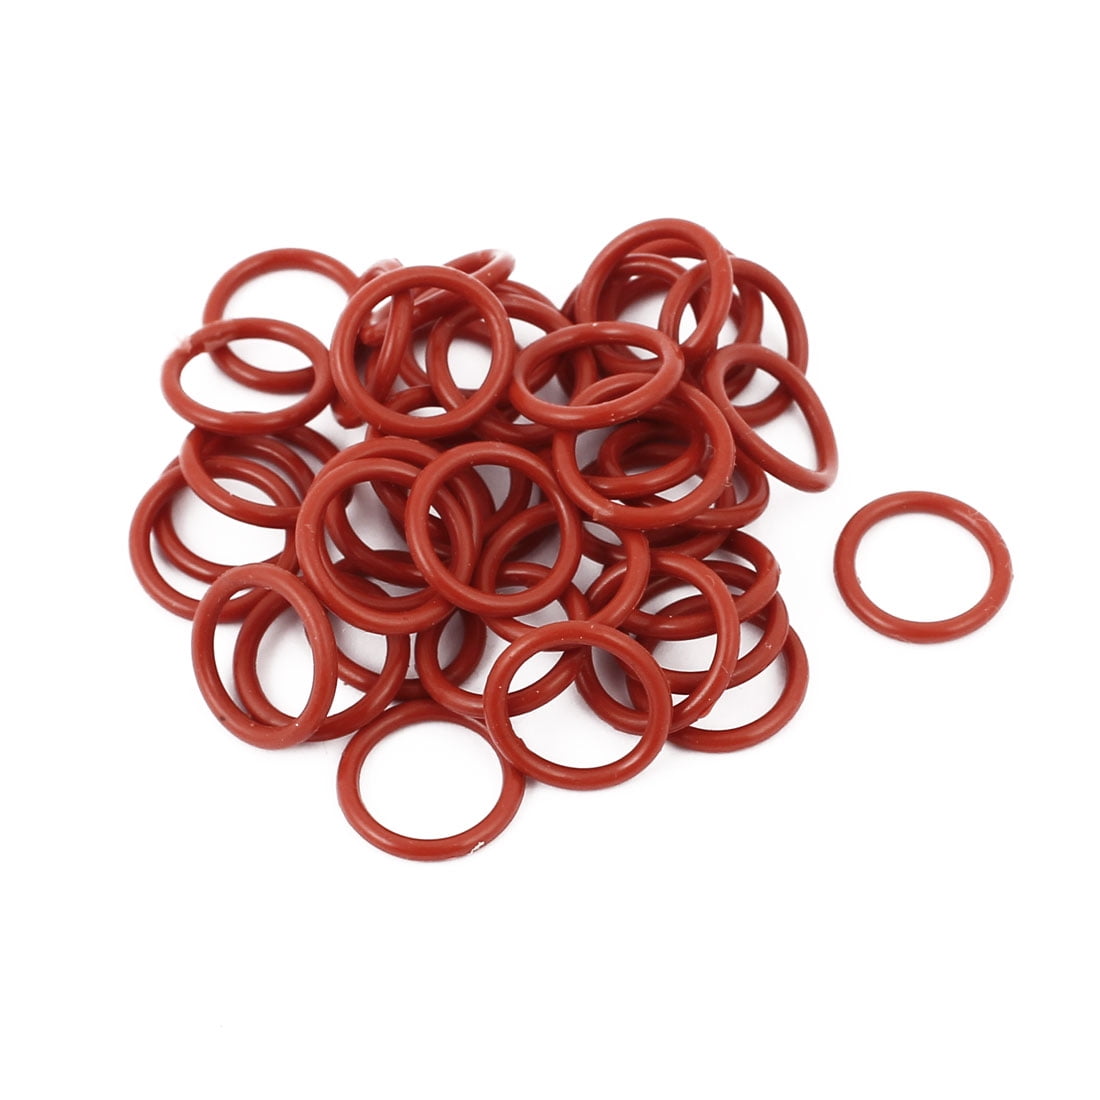 Silicone O-rings 15 x 1.5mm Price for 10 pcs